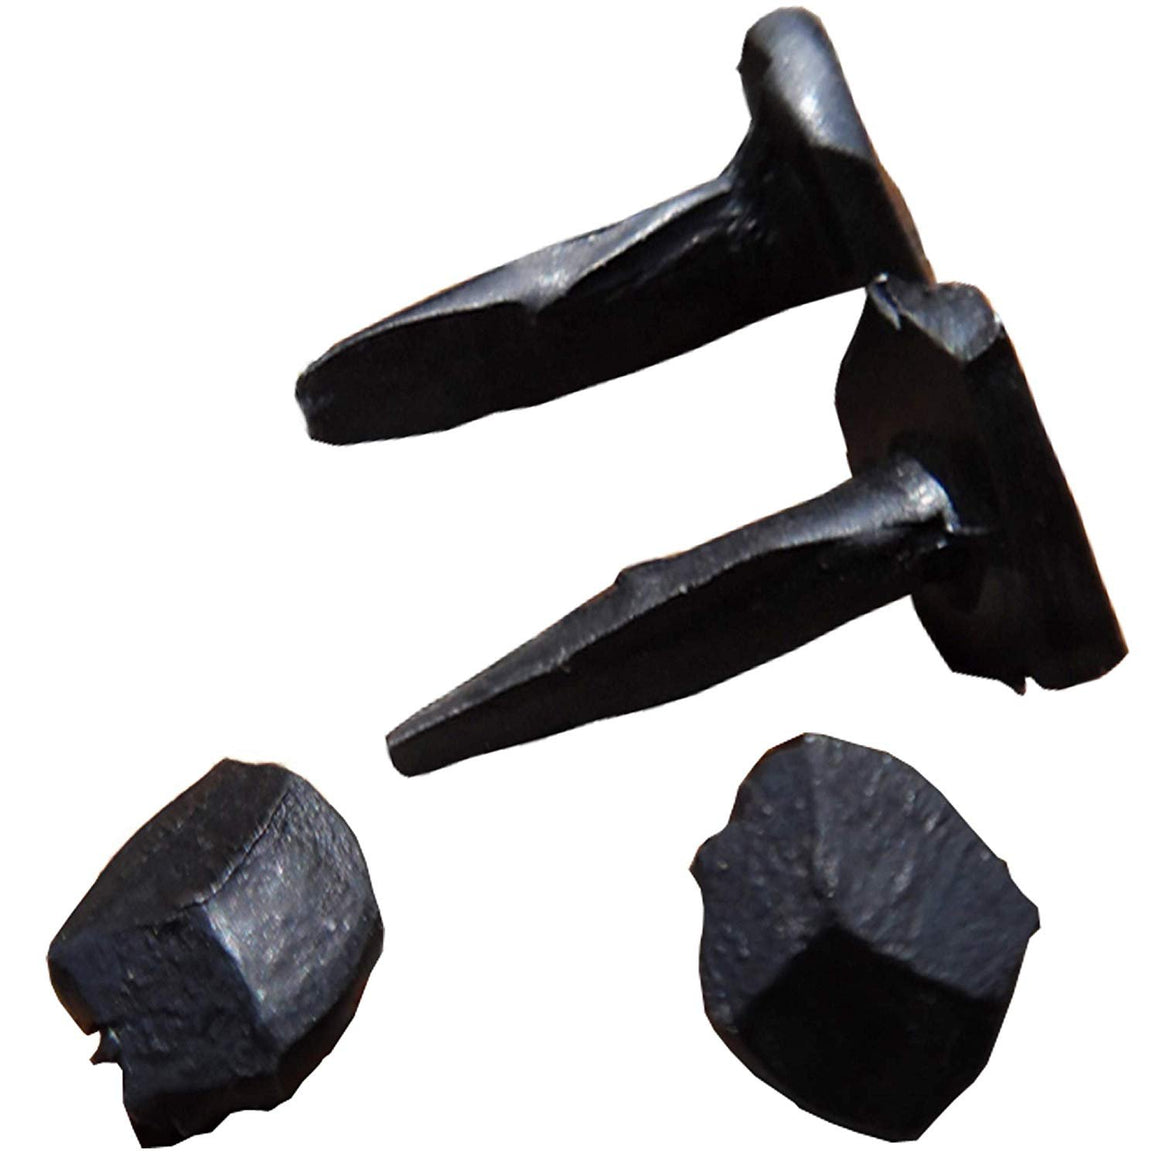 (10) 5/8" Steel Decorative Wrought Head Nails with Black Oxide Finish - 10 Nails